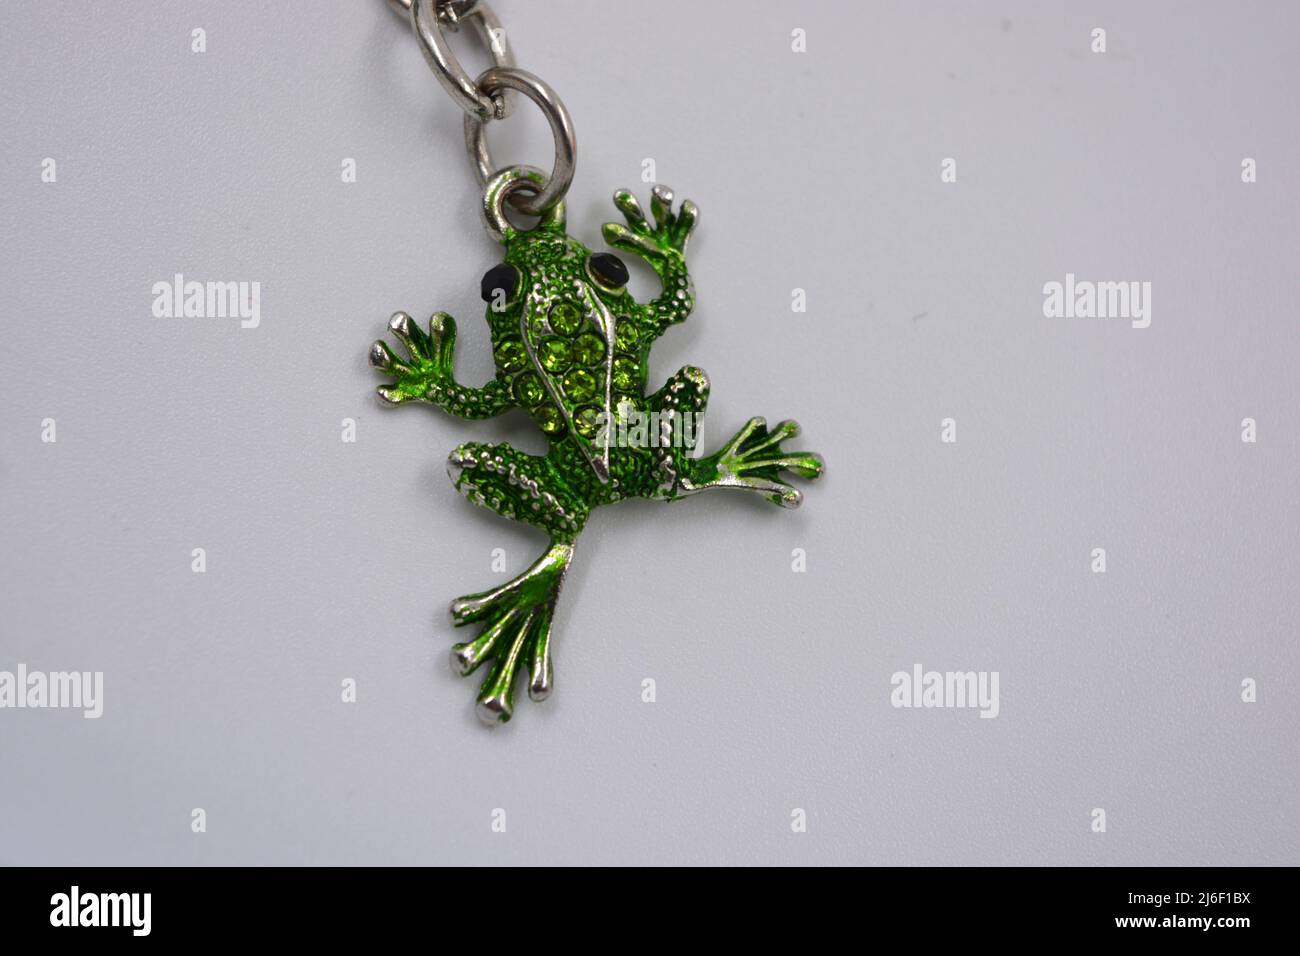 https://c8.alamy.com/comp/2J6F1BX/a-beautiful-bright-keychain-decorated-with-small-green-frogs-toads-with-small-green-stones-jewelry-from-a-metal-chain-of-three-small-frogs-decorat-2J6F1BX.jpg